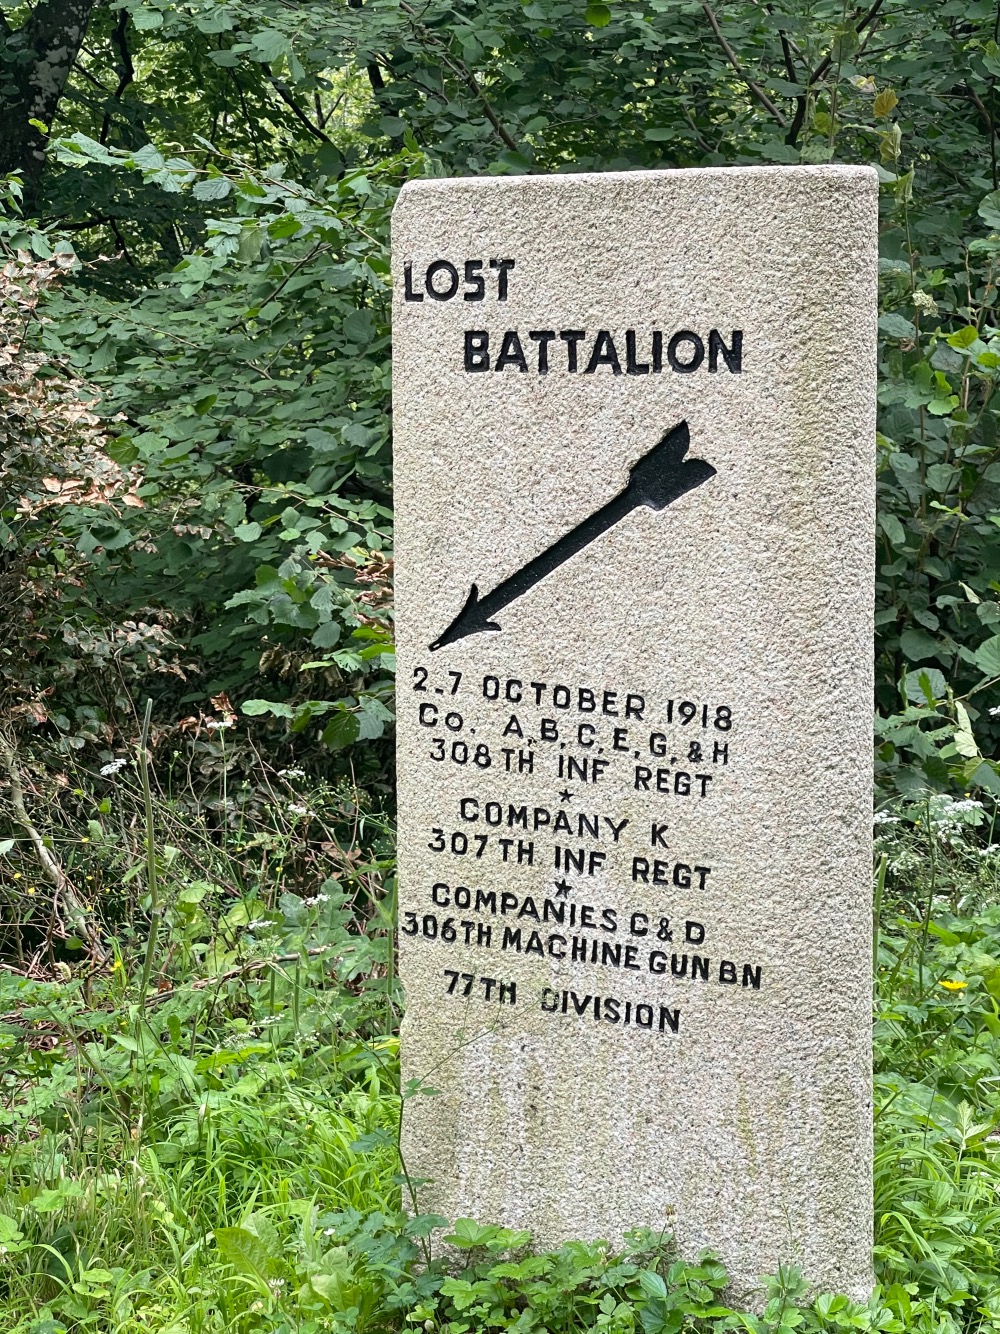 Stone monument in a forested area, inscribed with "lost battalion" and details of military units from october 2-7, 1918, including an arrow symbol.